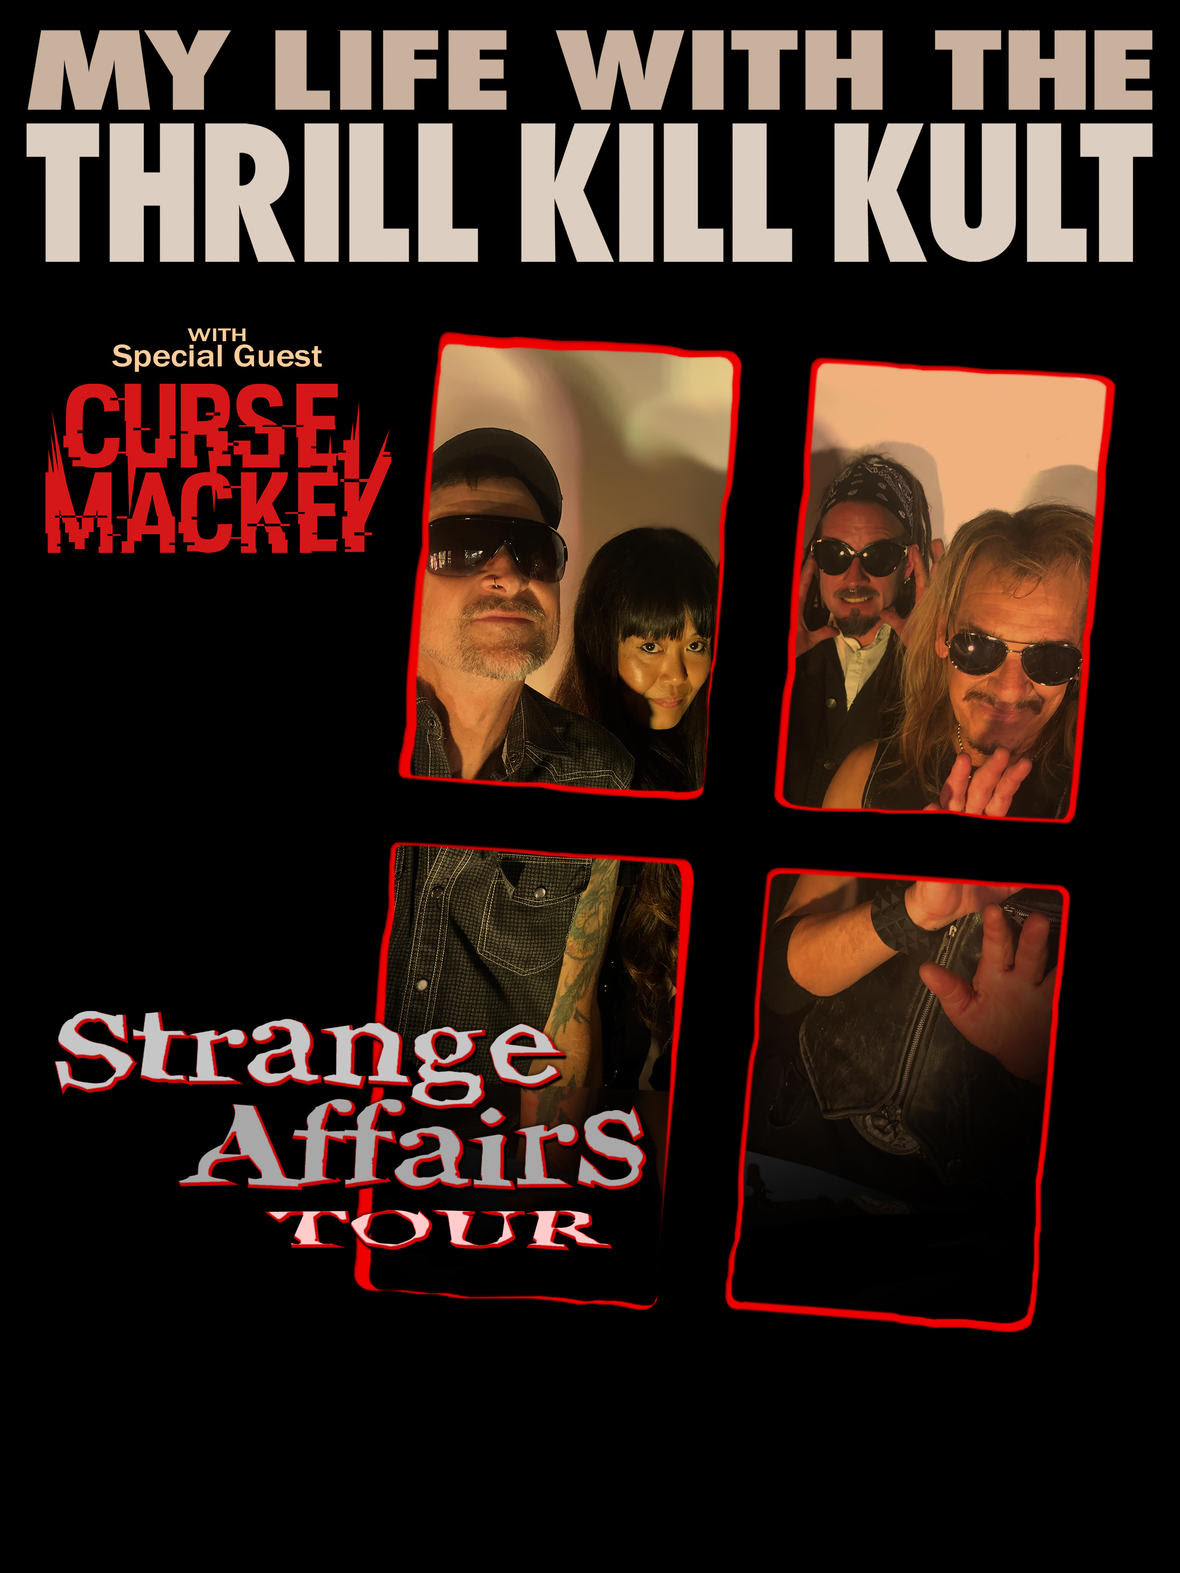 My Life With The Thrill Kill Kult Debut Single For In The House Of